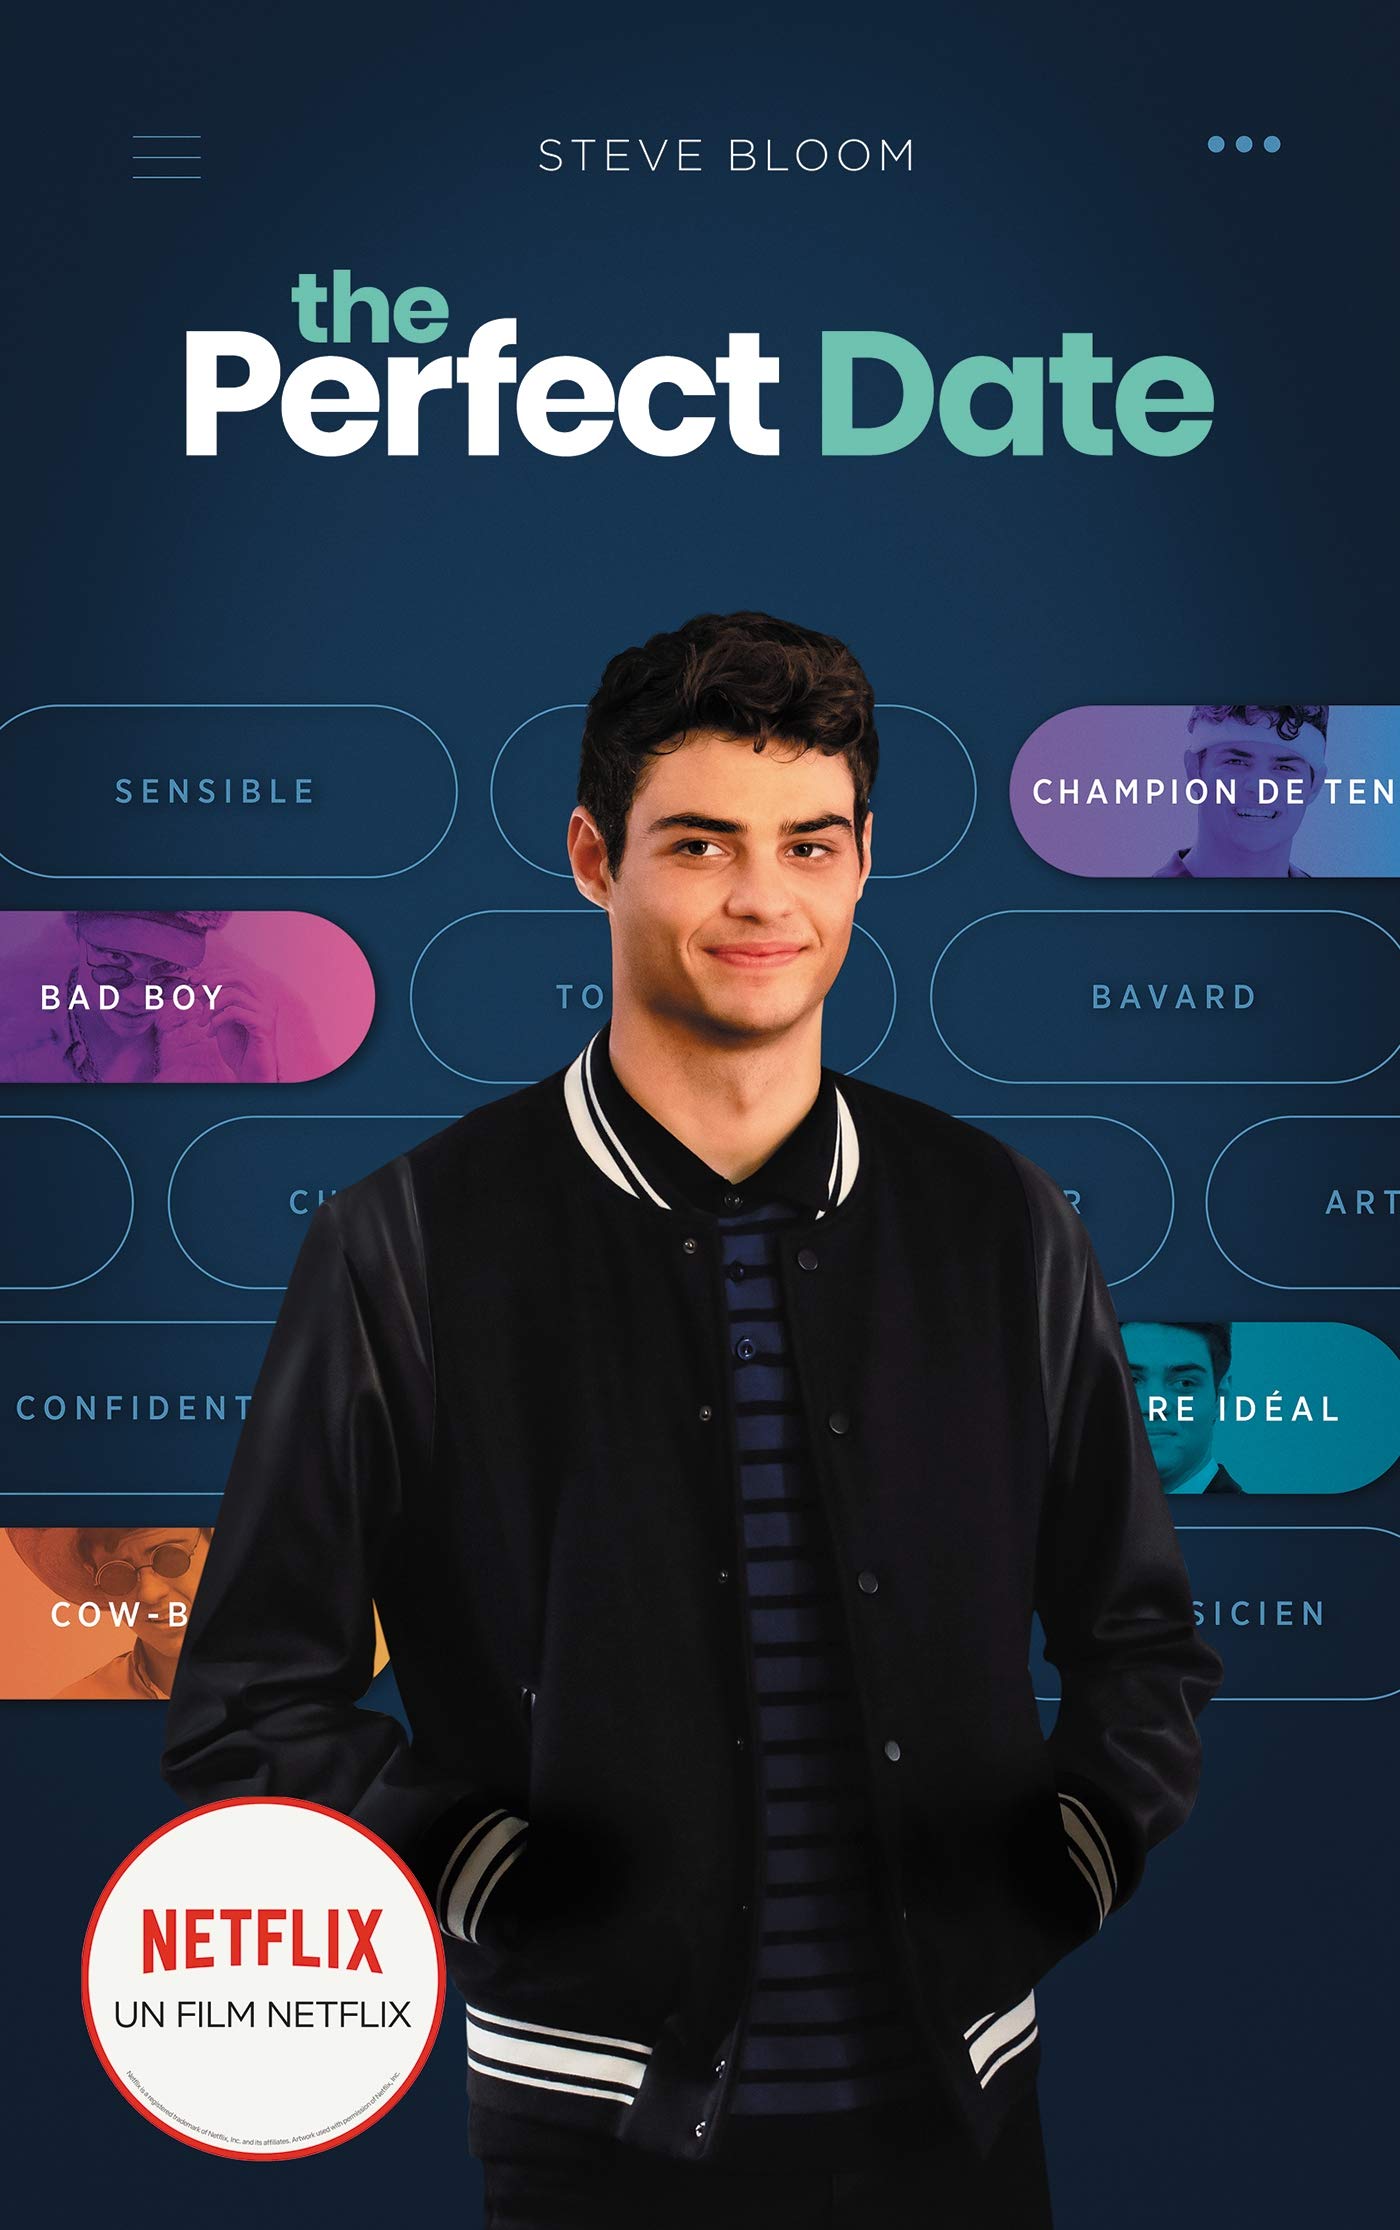 Poster phim The Perfect Date. (Nguồn: Internet)